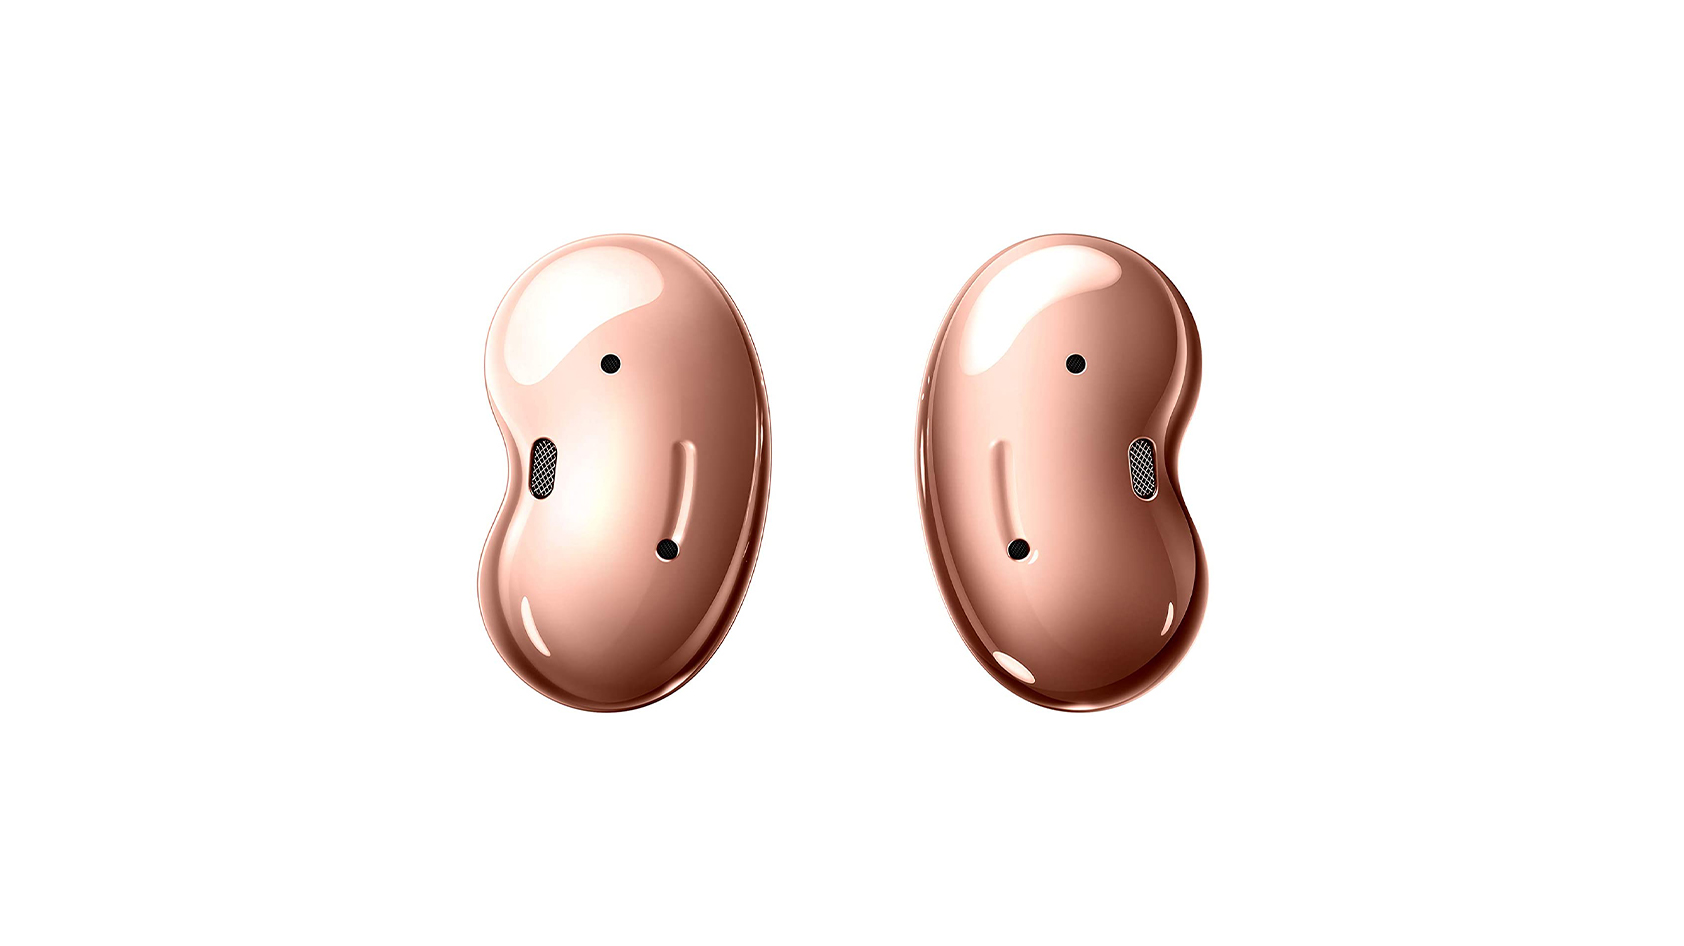 A product render of the Samsung Galaxy Buds Live noise canceling true wireless earbuds in Mystic Bronze against a white background.